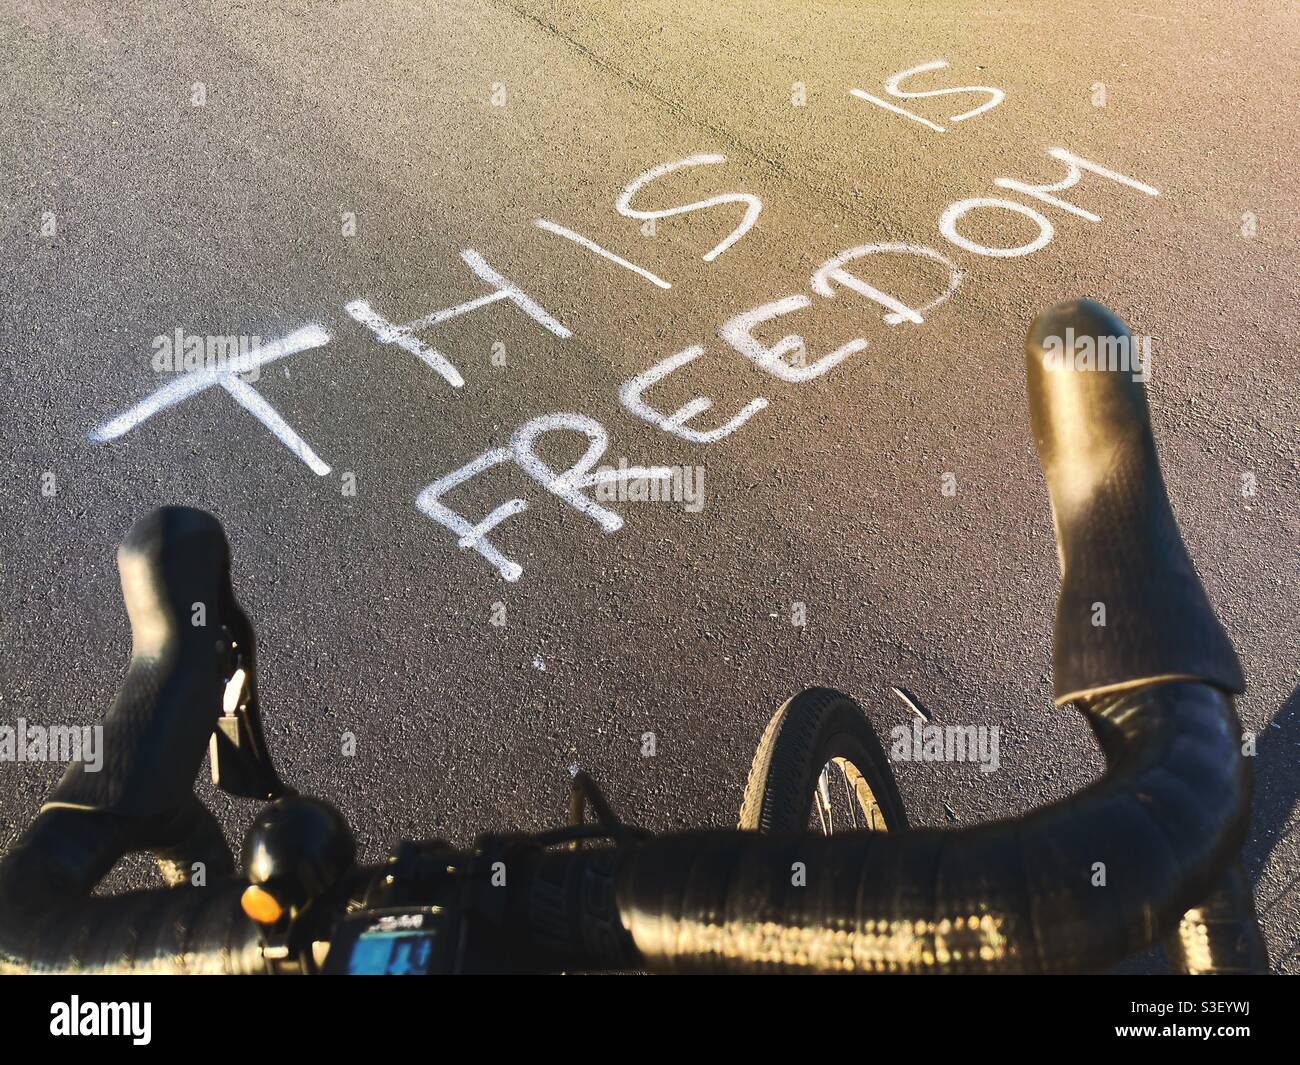 The Words this is Freedom Viewed over the Drop Bars of a Bicycle on the Pavement Stock Photo